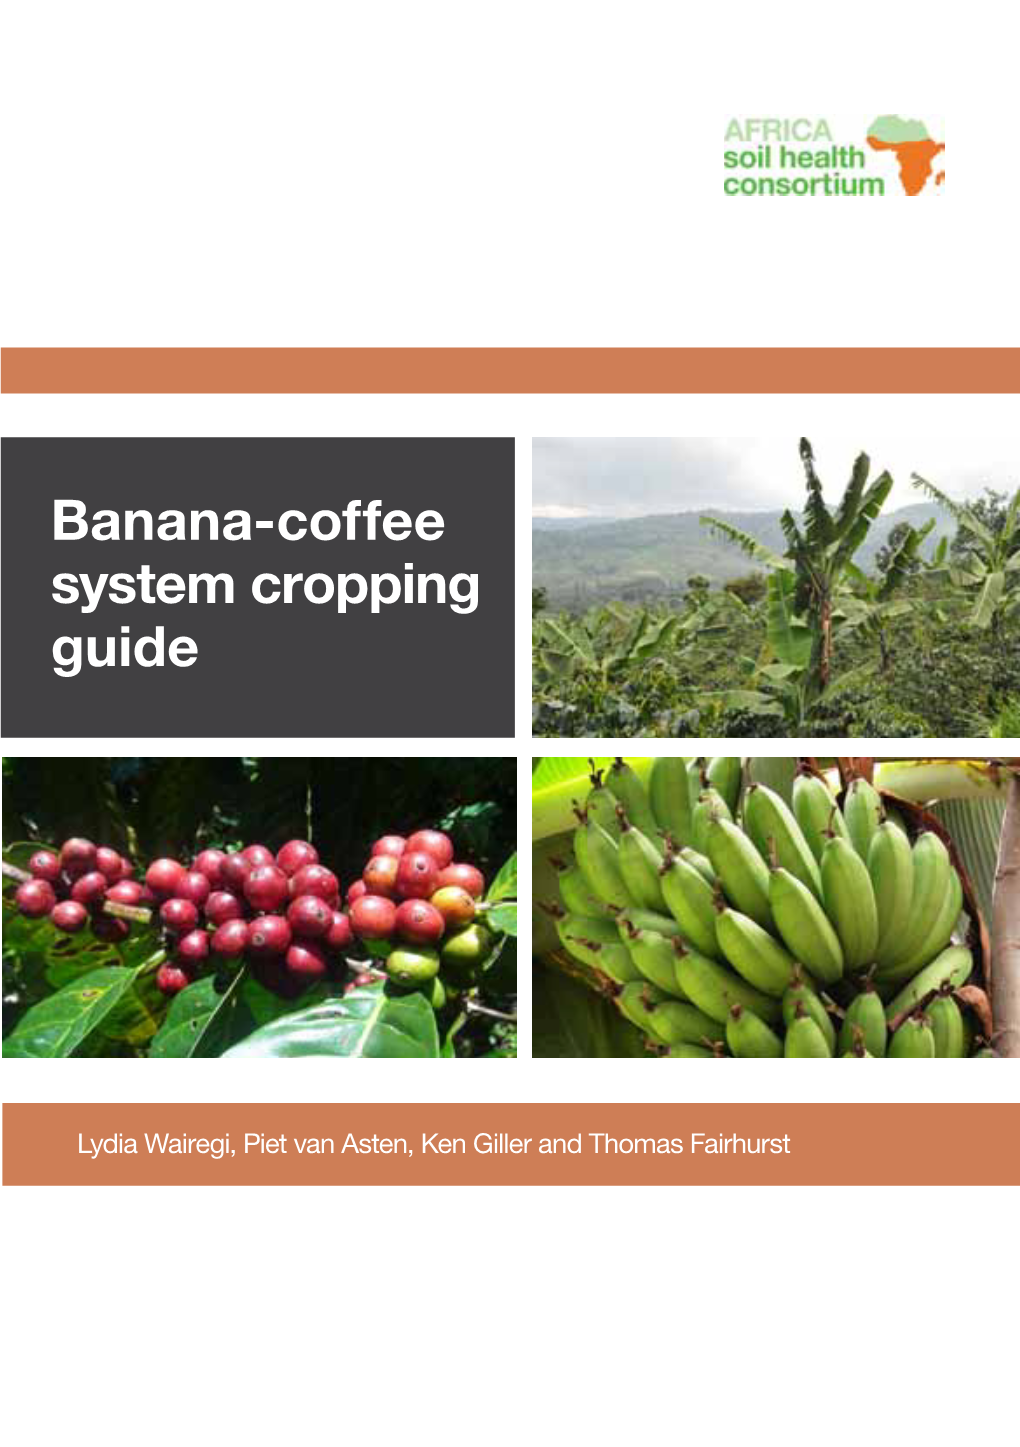 Banana-Coffee System Cropping Guide